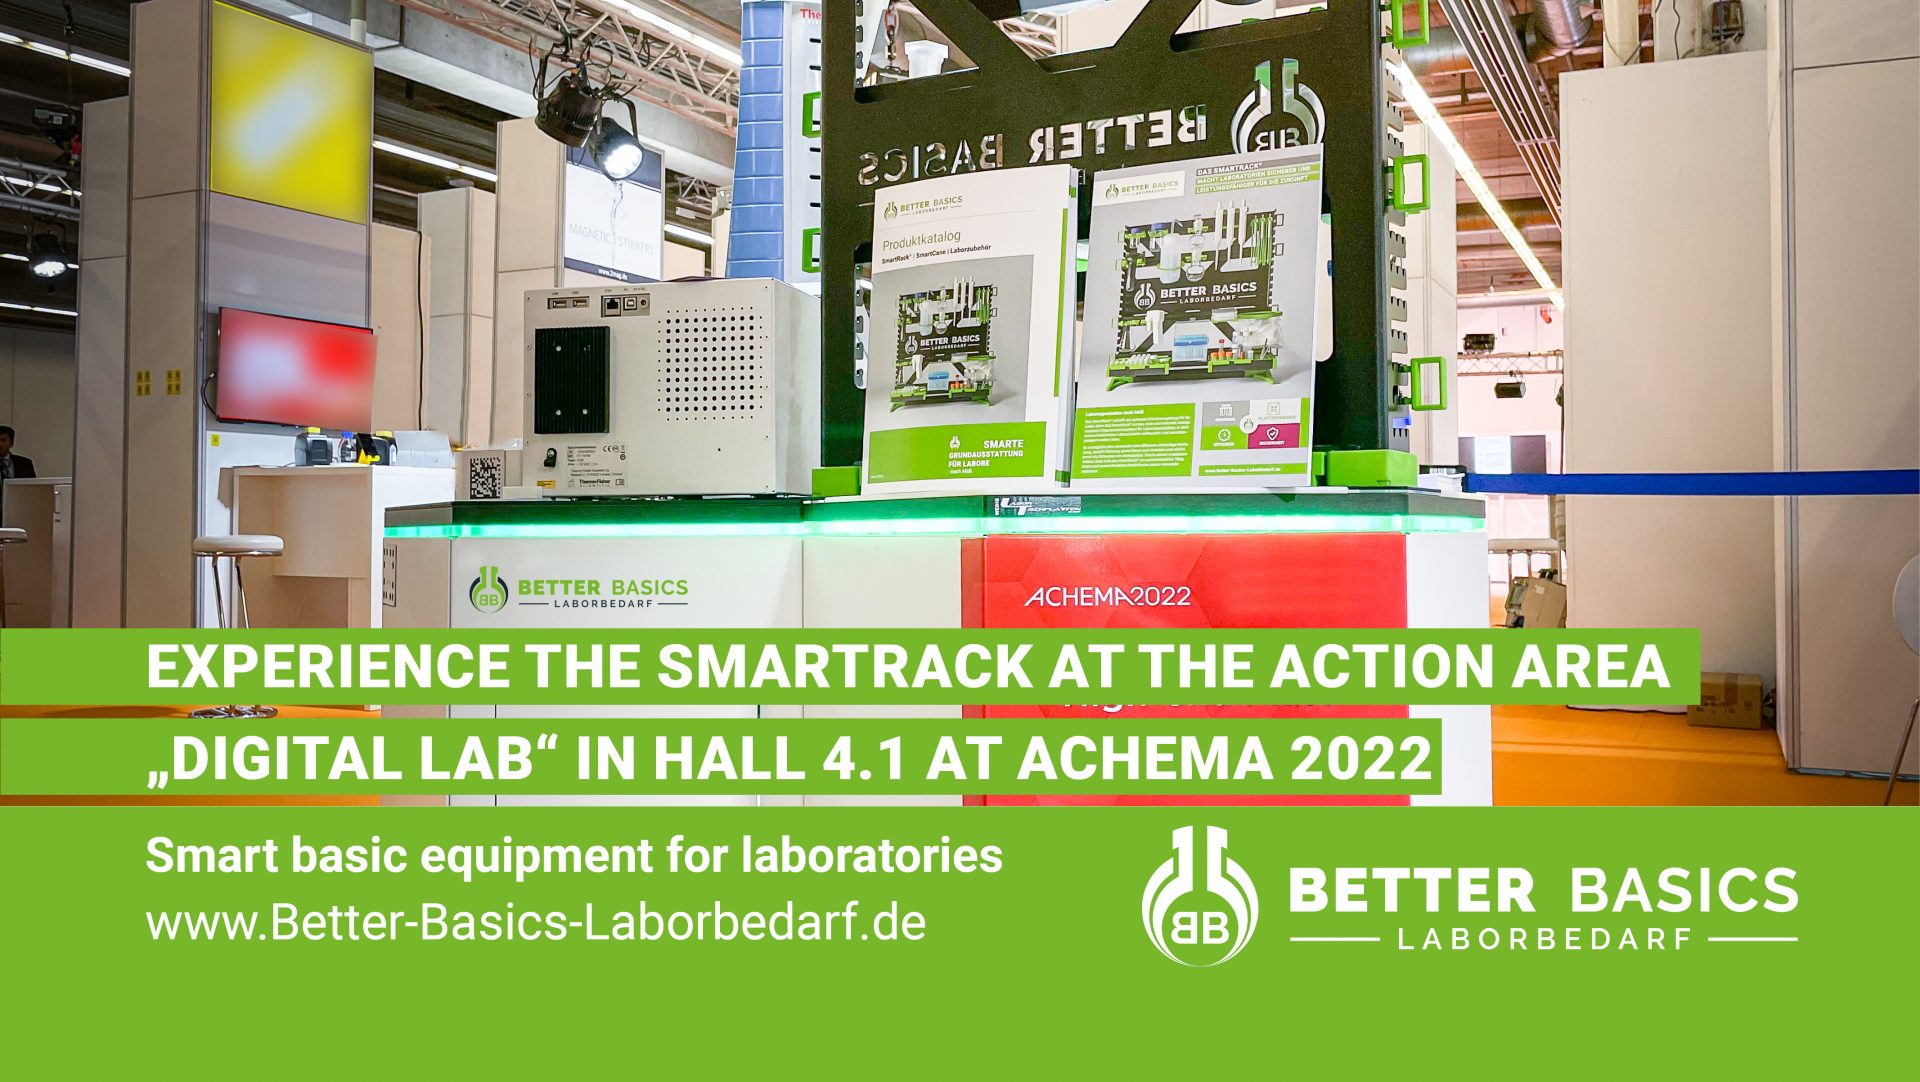 Experience the Smartrack at the Action area "Digital Lab" in Hall 4.1 at Achema 2022